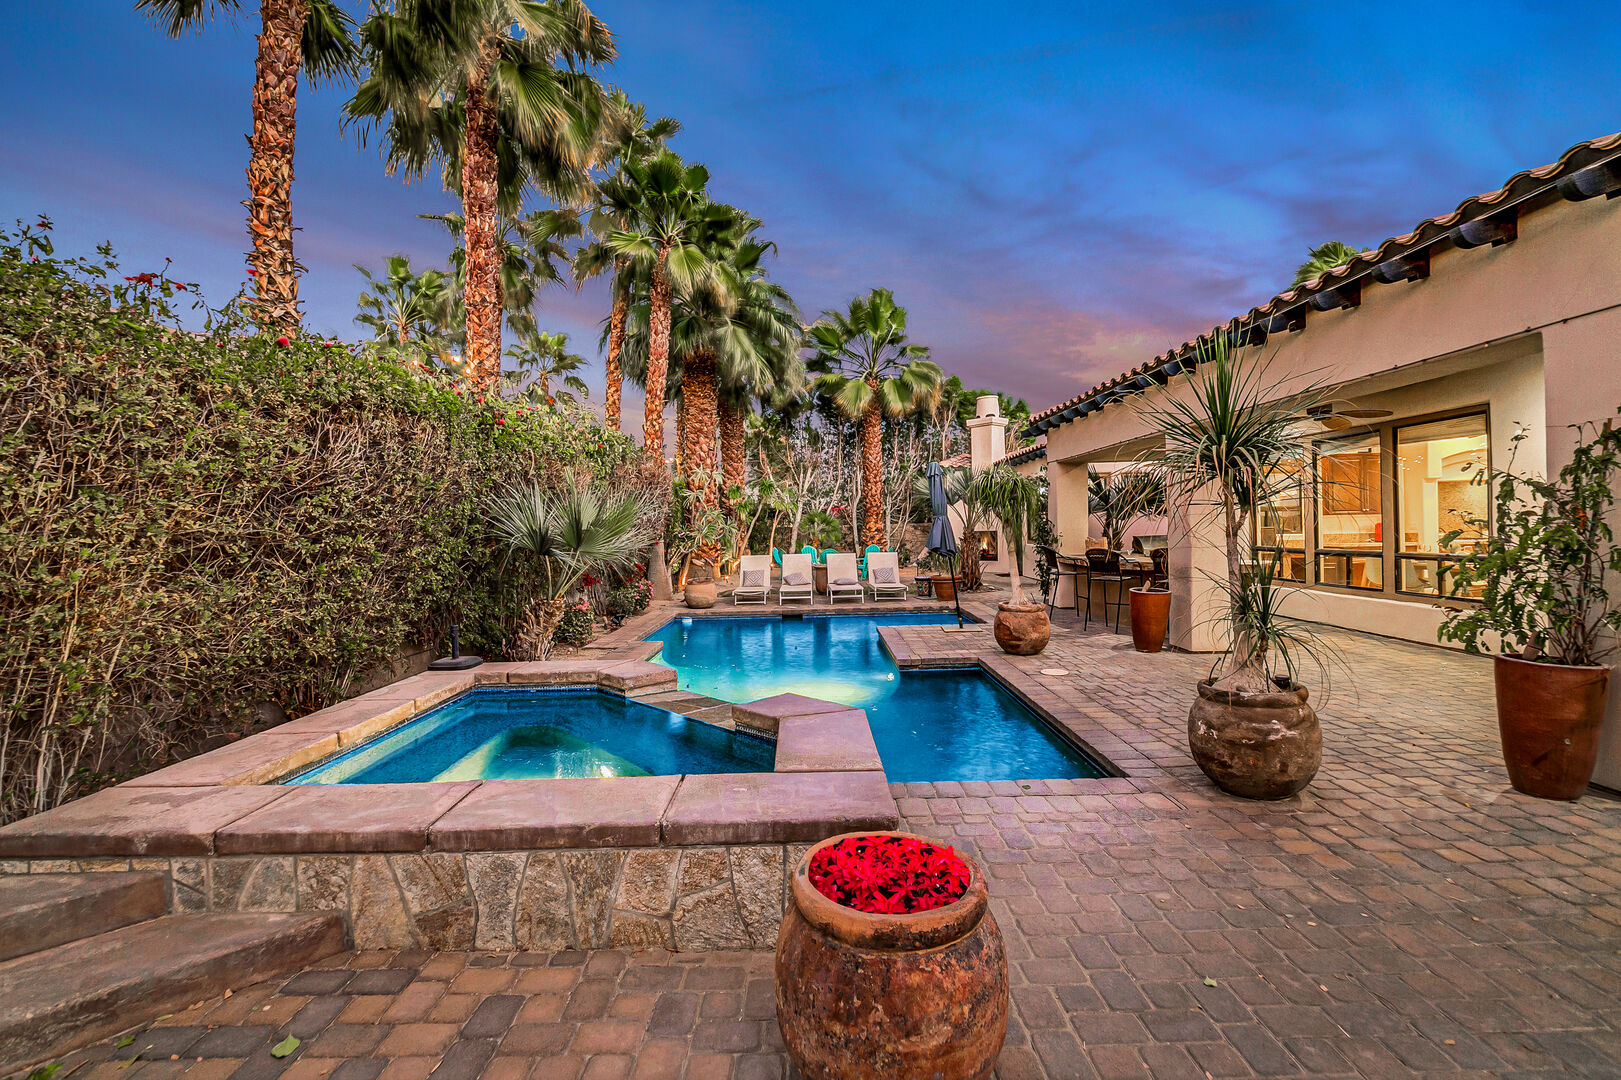 This rare oasis is surrounded by 15-foot lushes hedges making it one of the most private and exclusive properties.